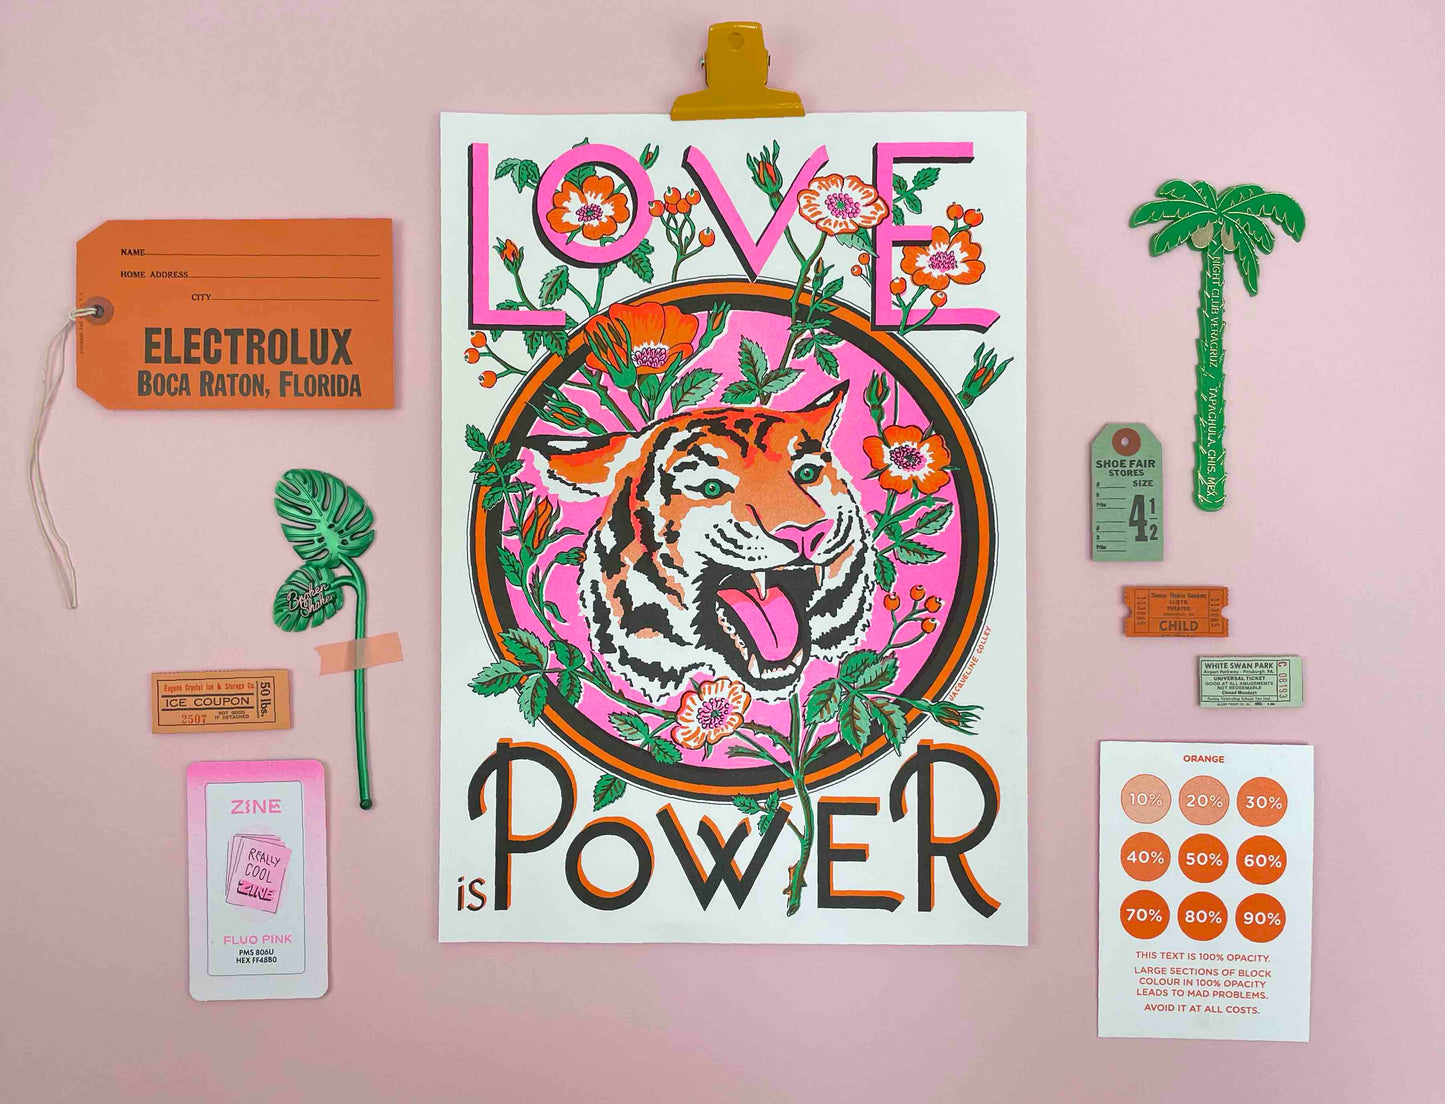 A3 Love is Power Risograph